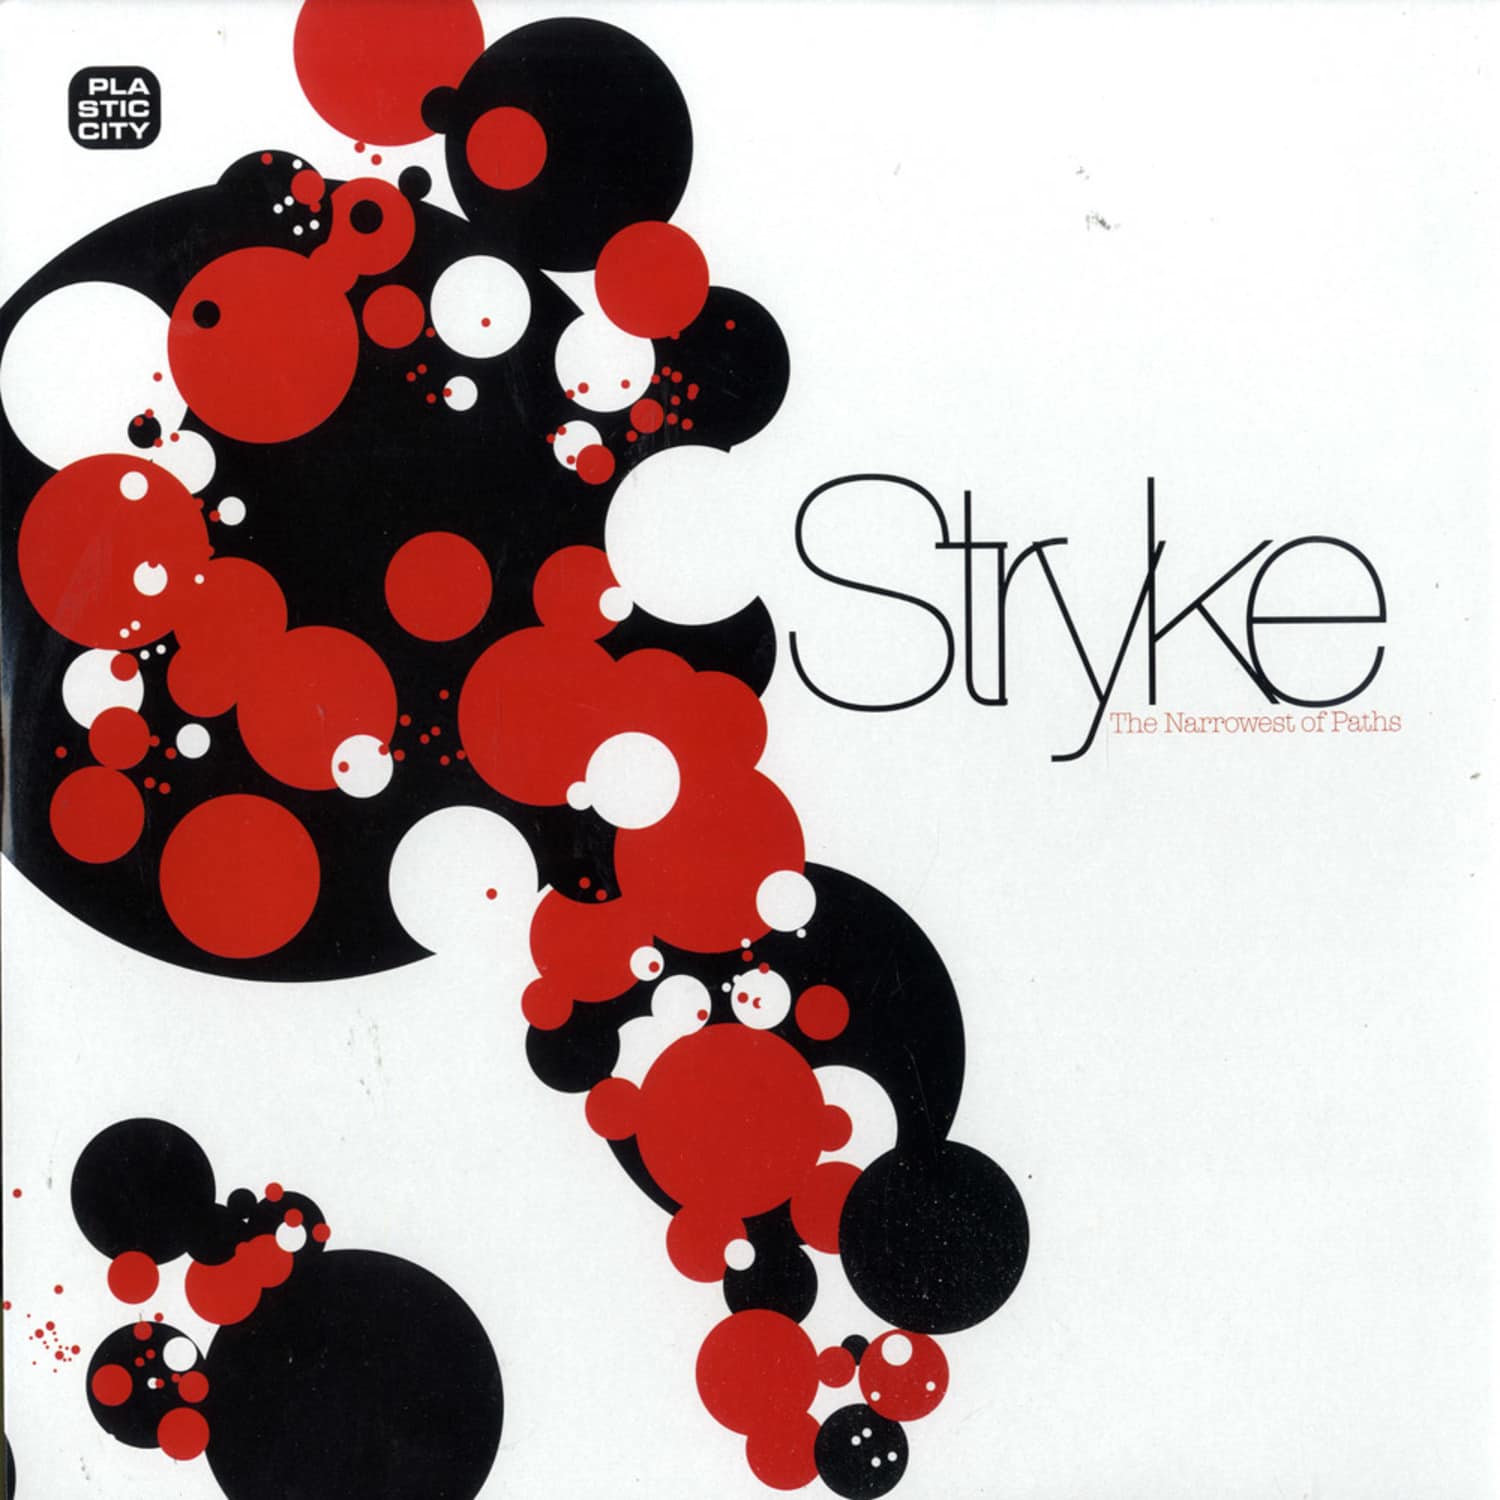 Stryke - THE NARROWEST OF PATHS